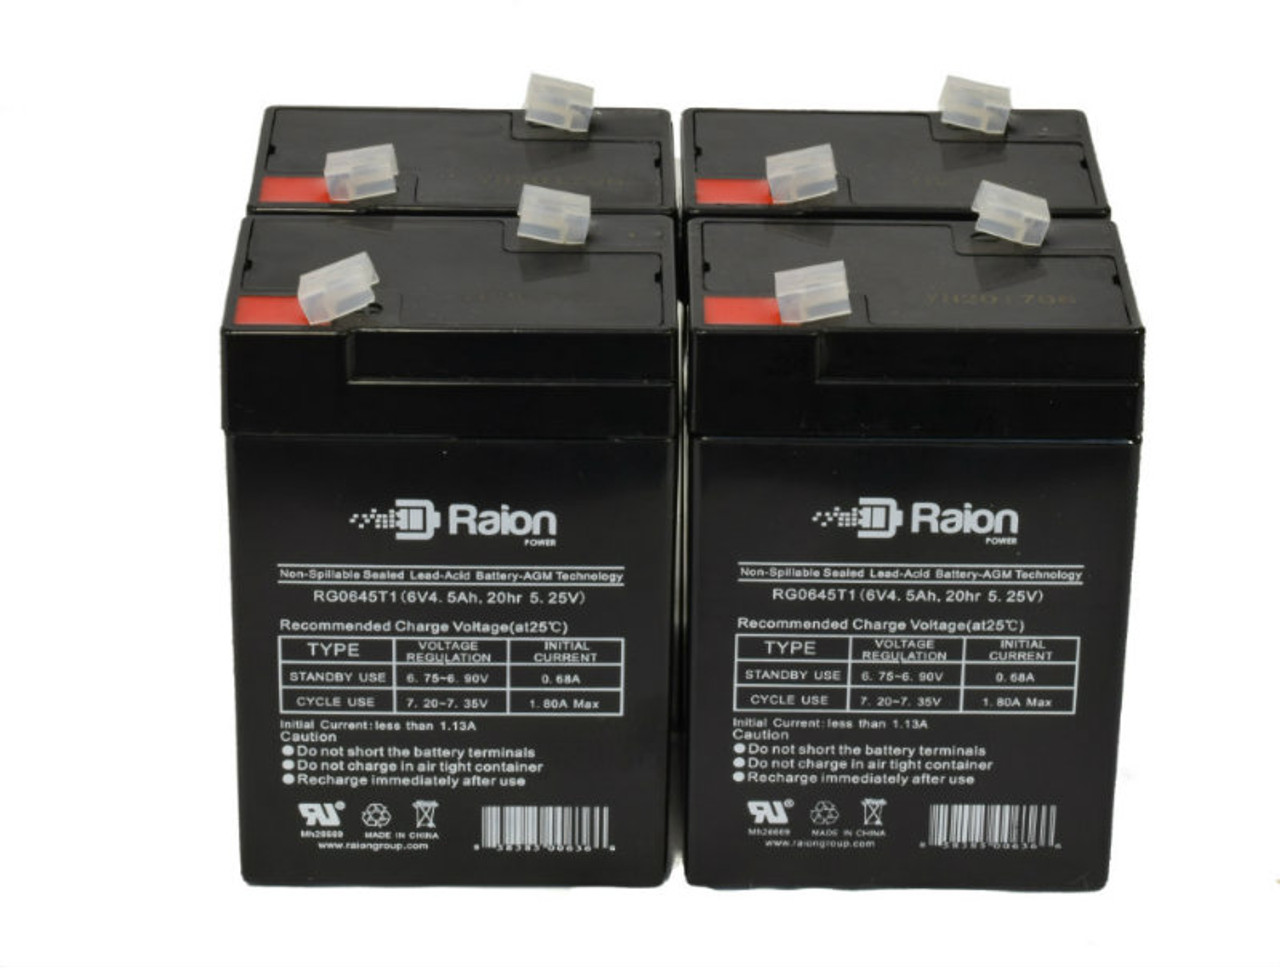 Raion Power 6V 4.5Ah Replacement Emergency Light Battery for Edwards 1600A - 4 Pack